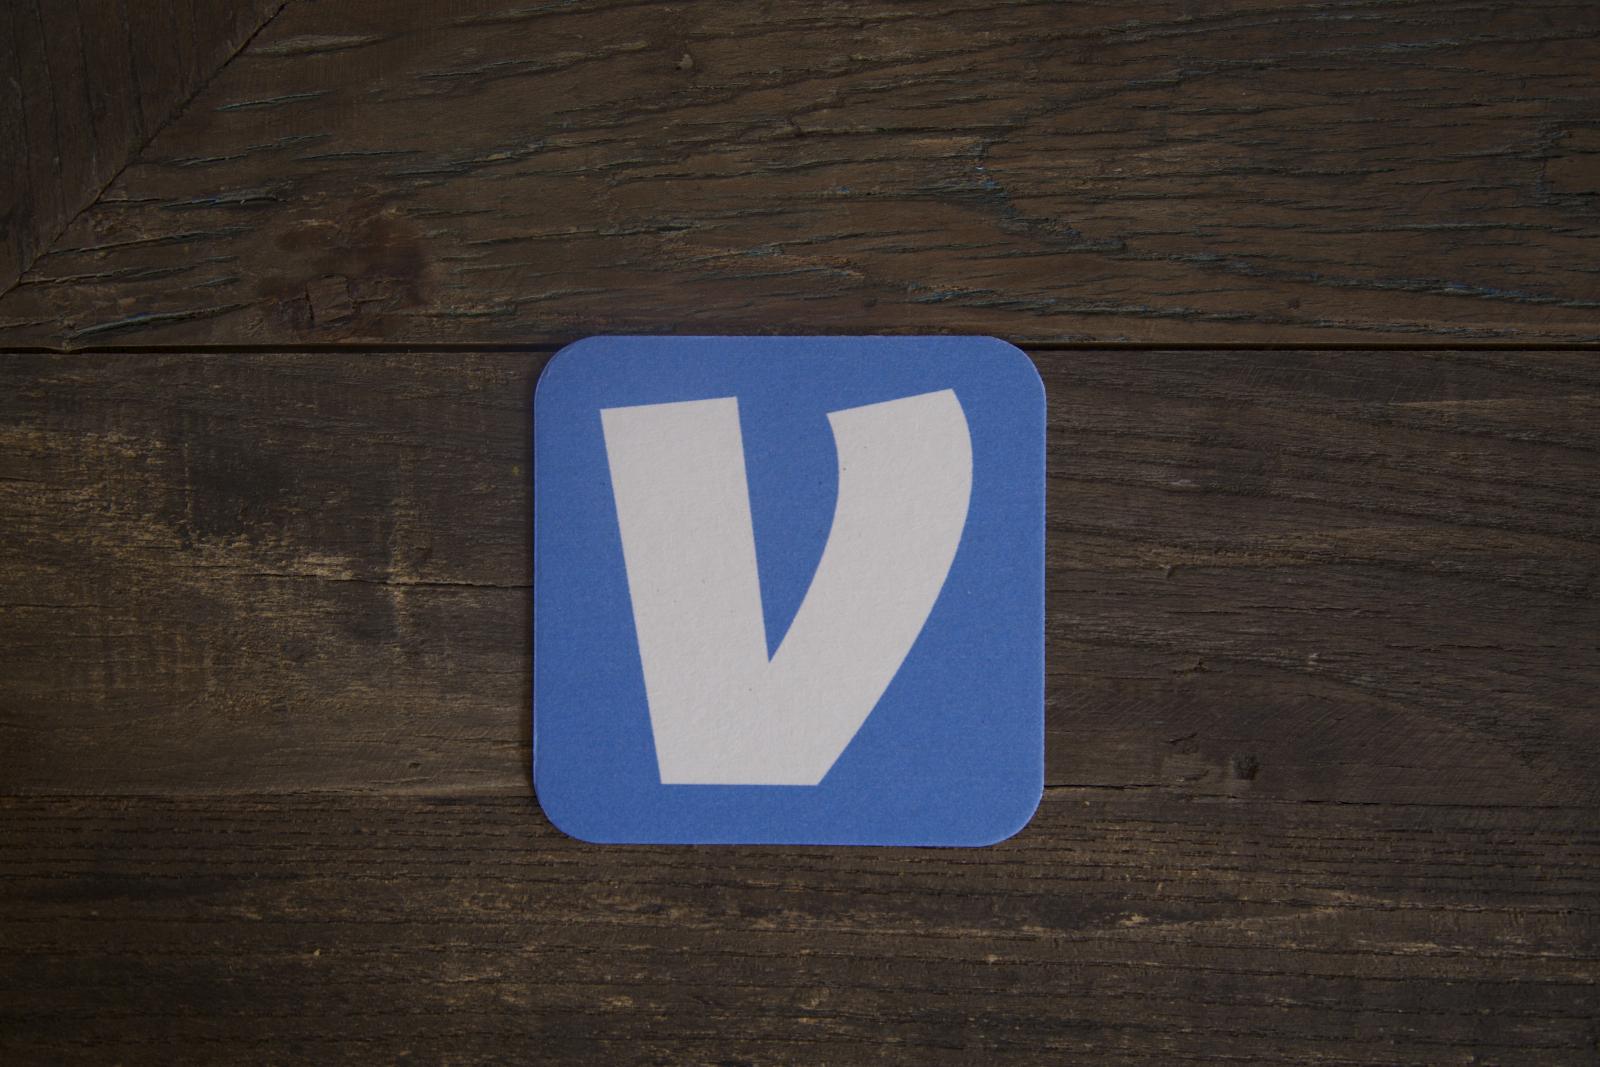 Venmo gets a new way to split expenses among groups